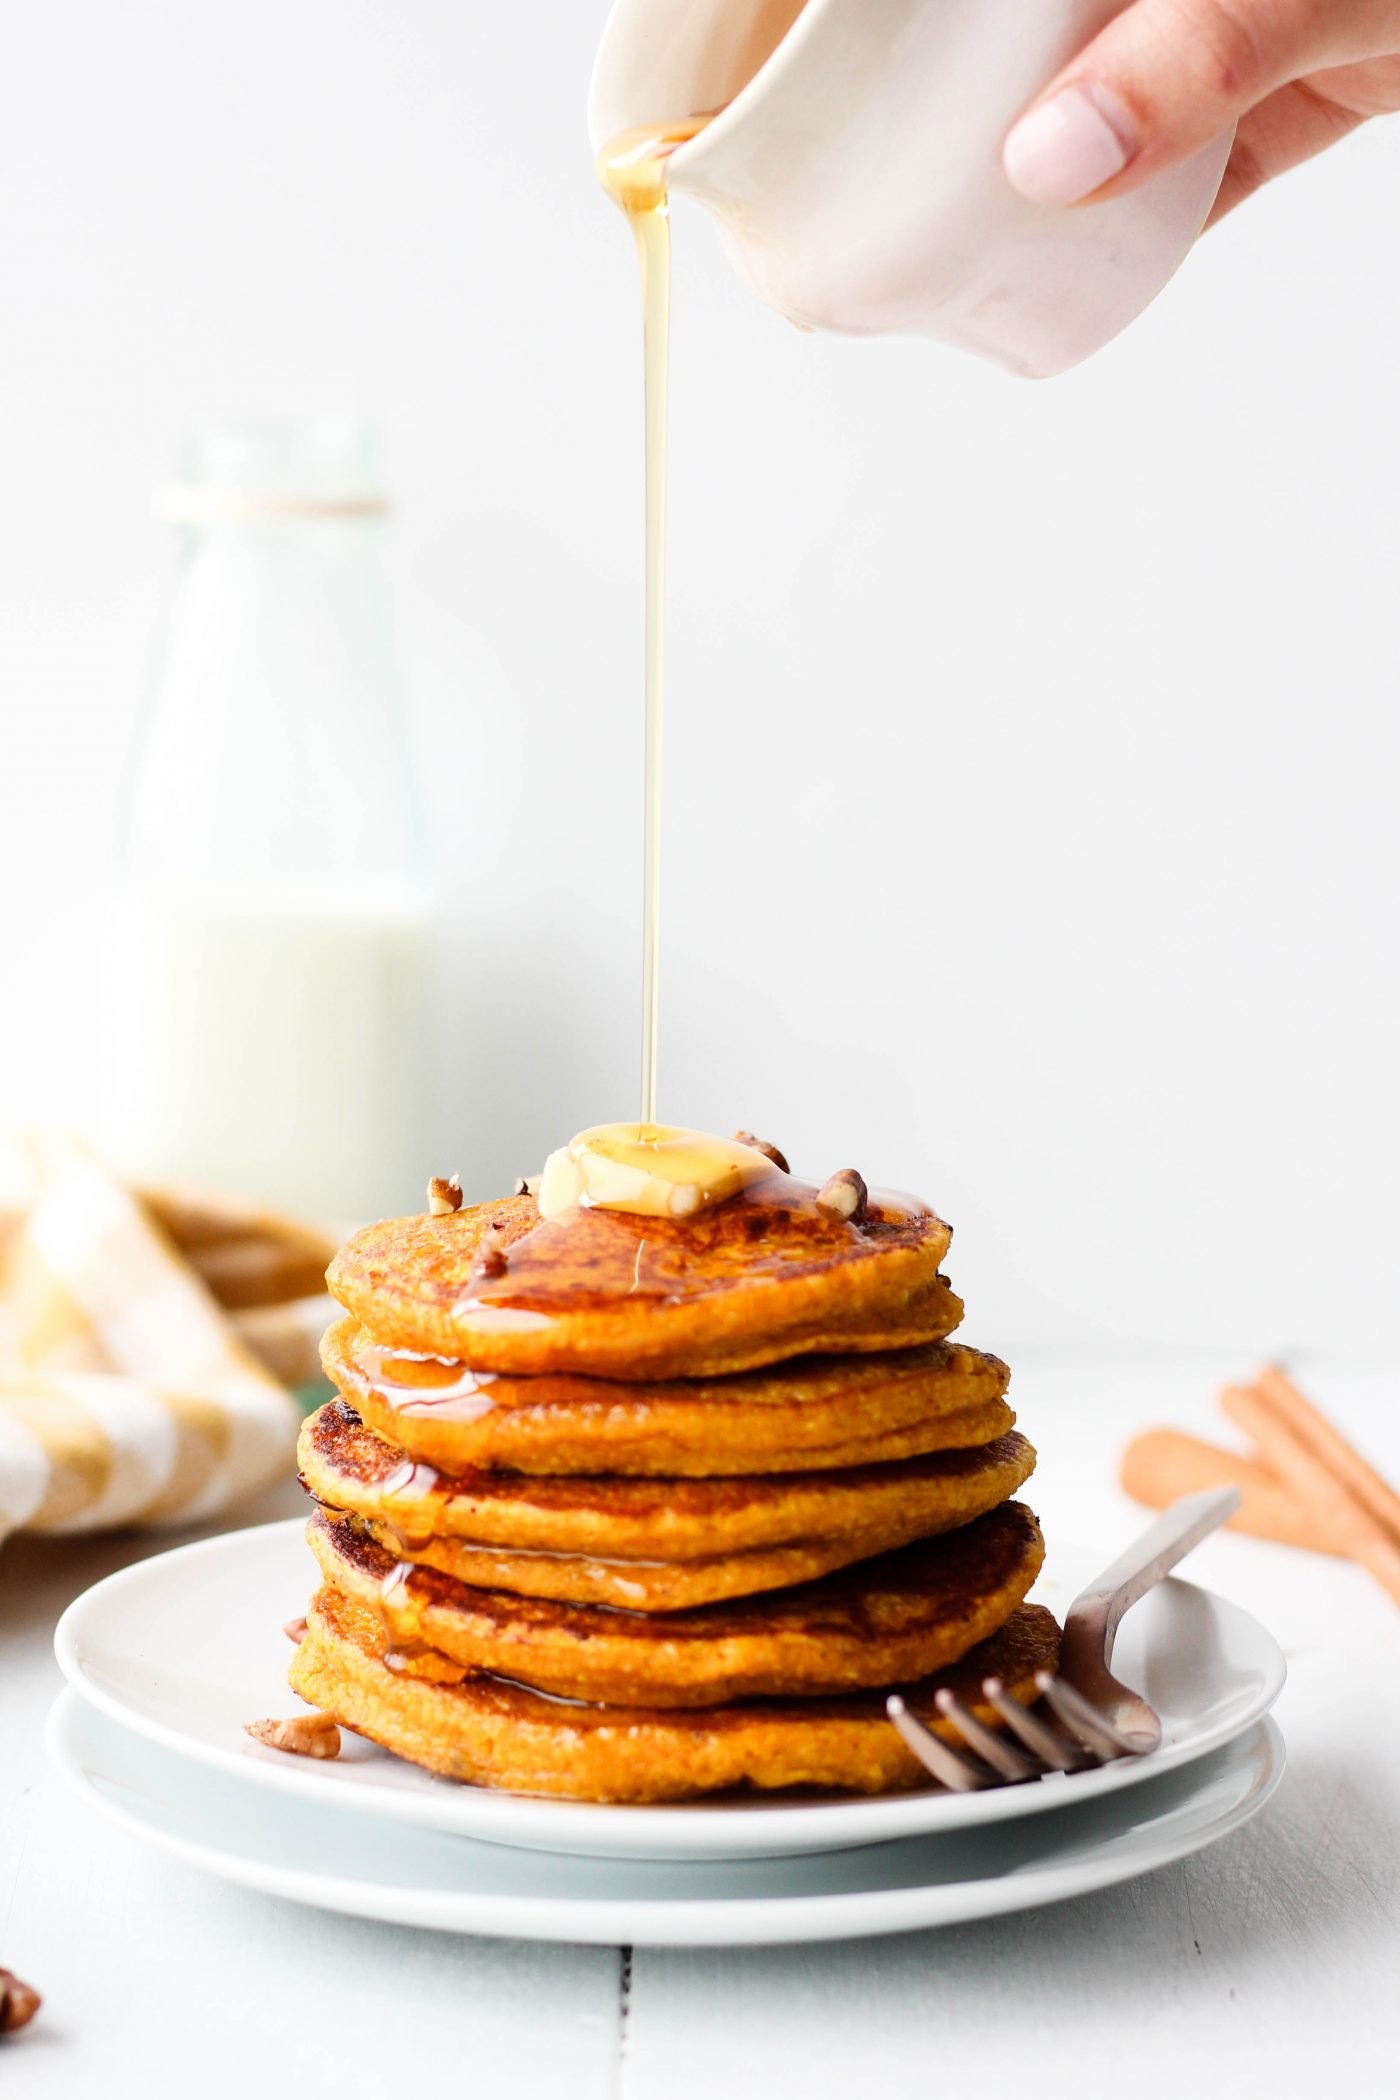 Breakfast just got so much easier with these Oatmeal Pumpkin Pancakes! Just throw all the ingredients in a blender and cook on a pan for delicious and healthy pumpkin pancakes. Perfect for fall - or any time of year!